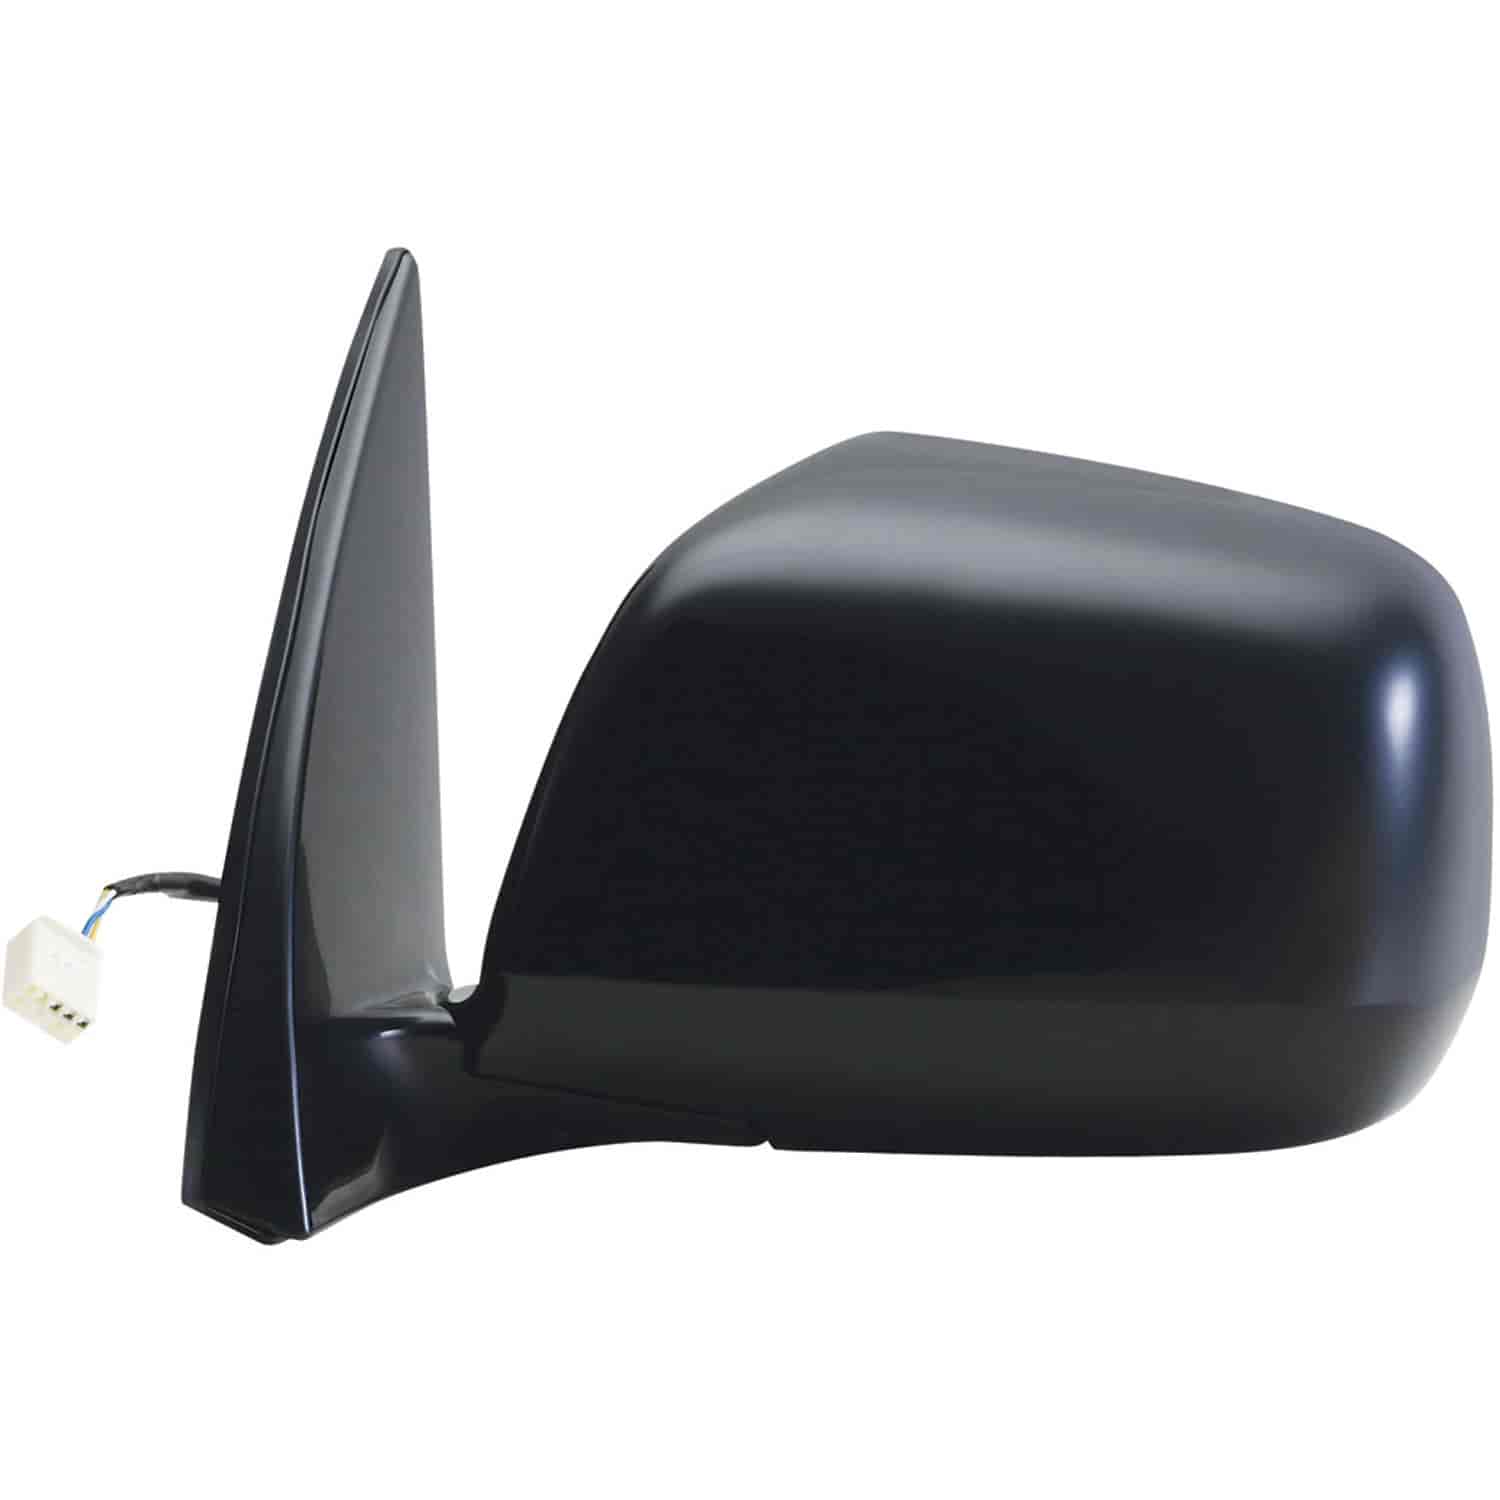 OEM Style Replacement mirror for 01-07 Toyota Highlander driver side mirror tested to fit and functi